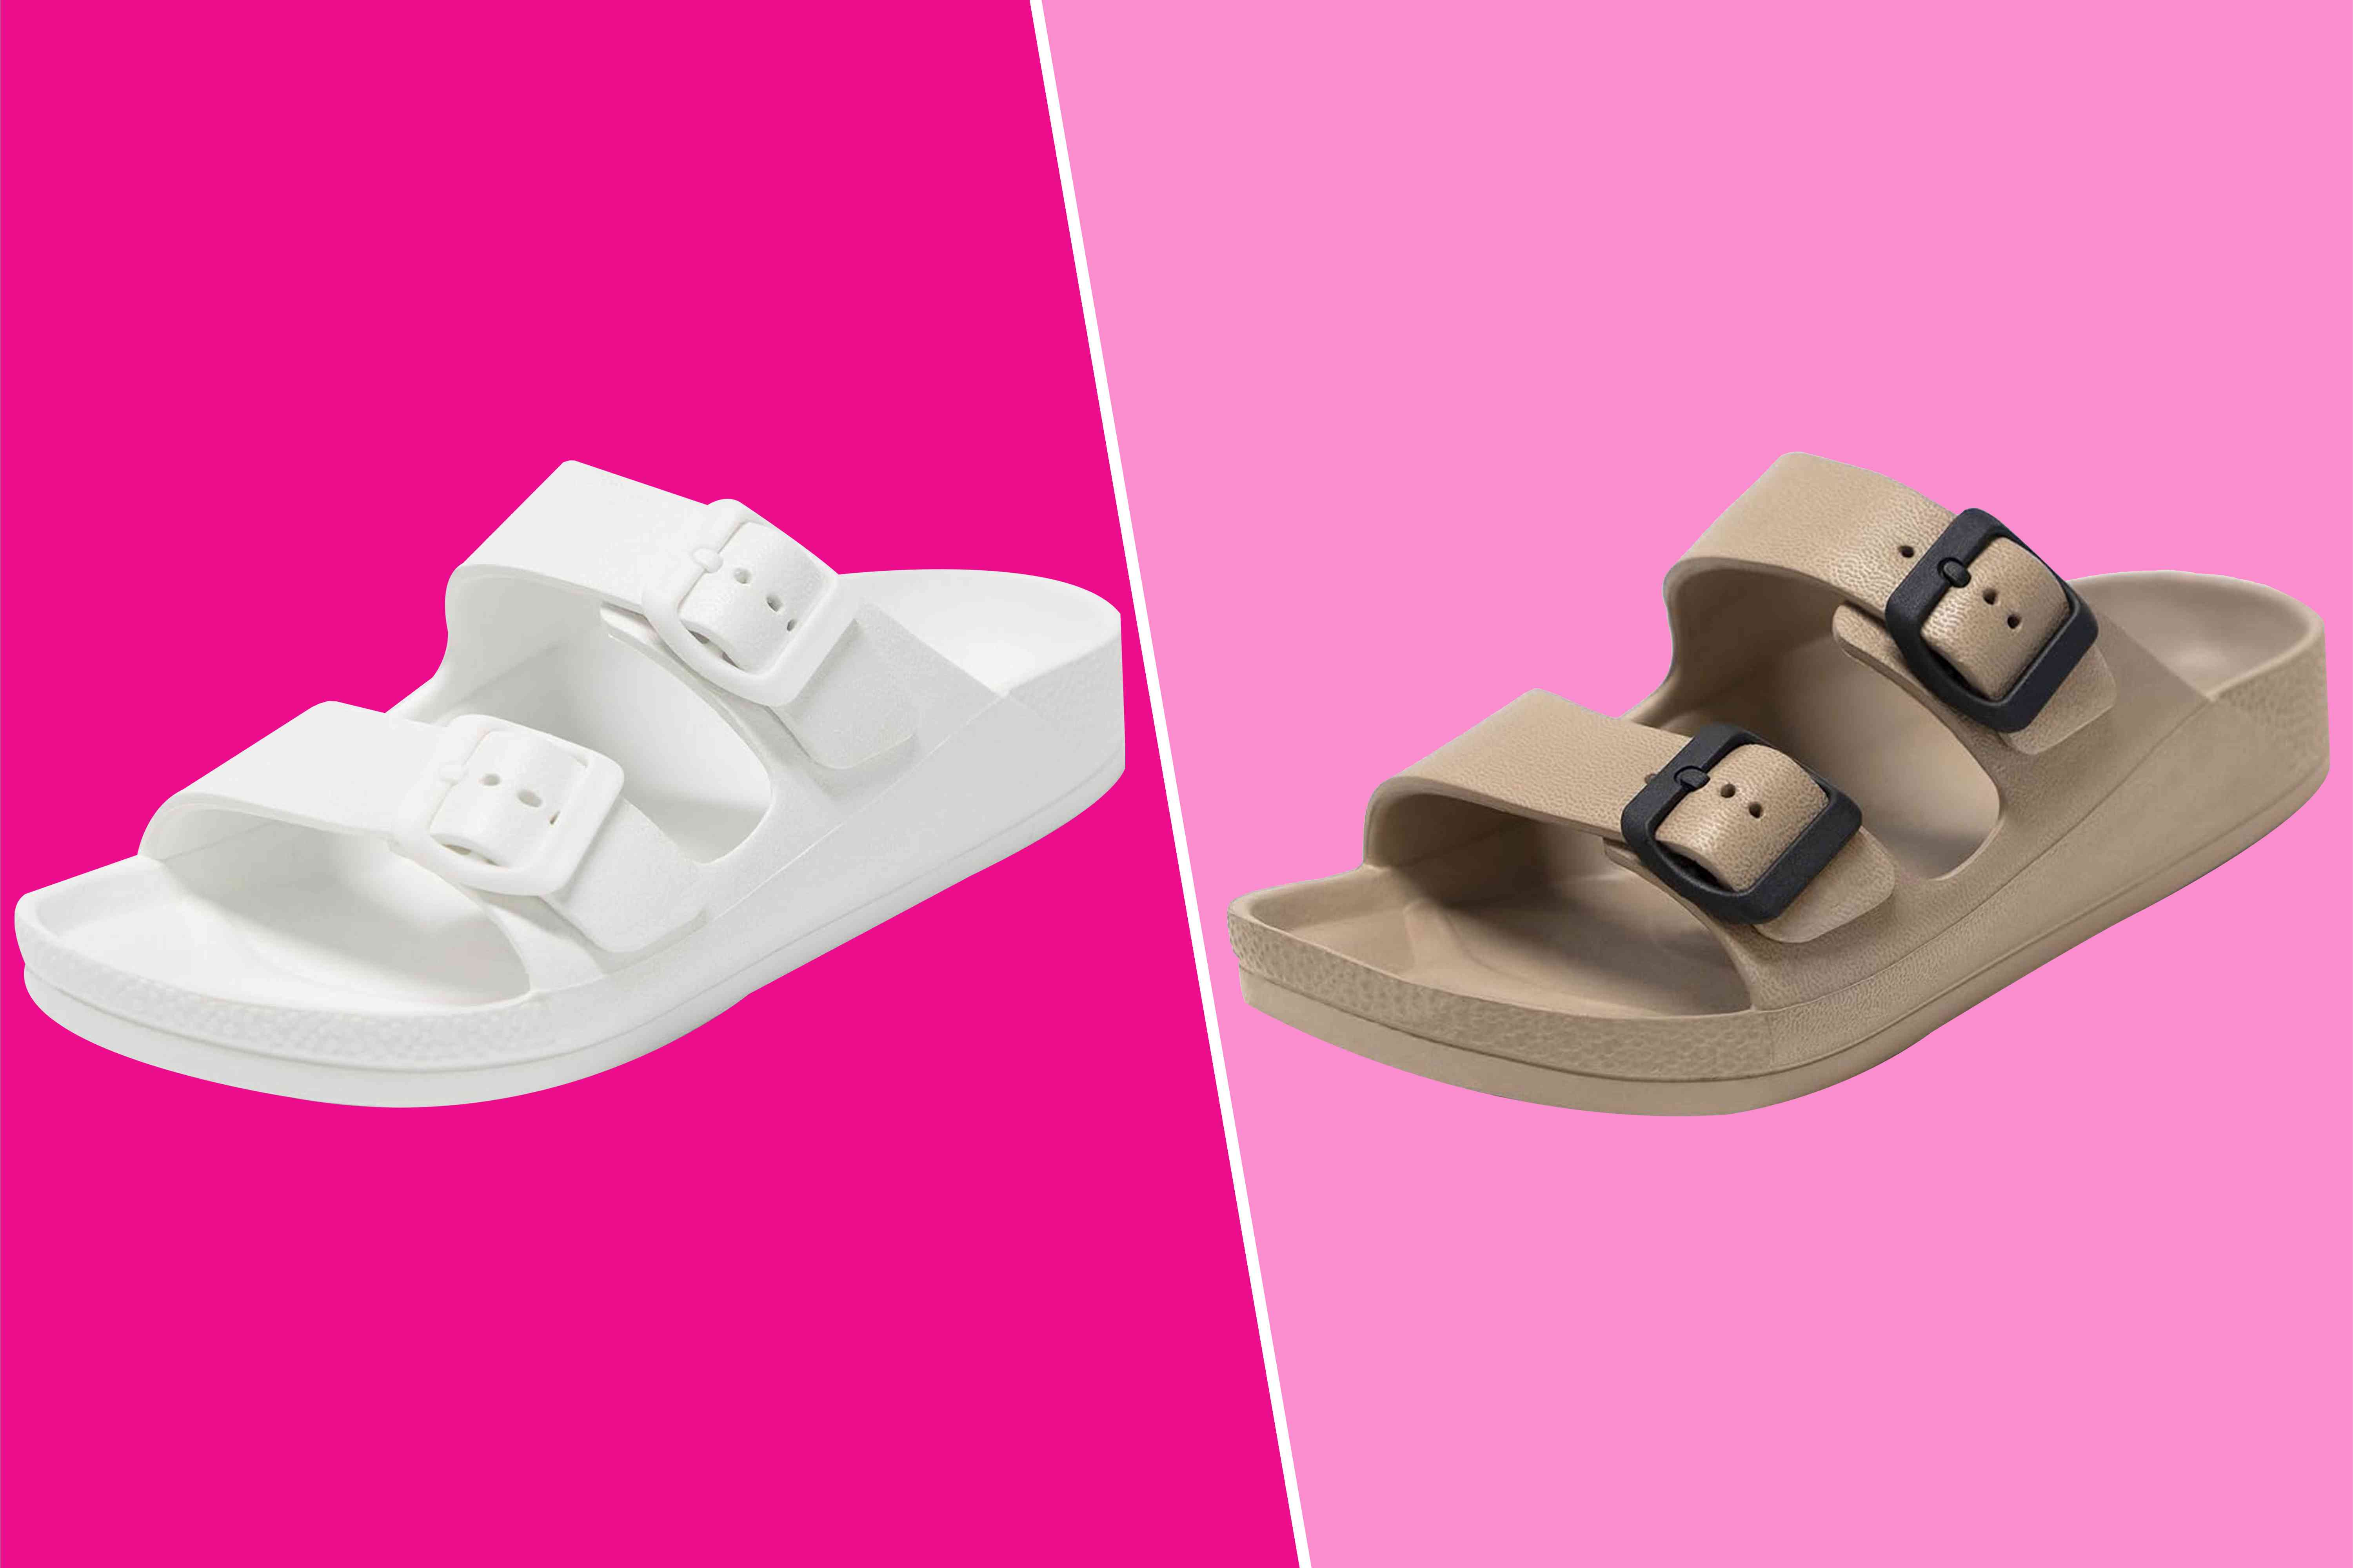 These ‘Comfortable and Cute’ Slide Sandals That Look Like Celeb-Worn Styles Are Down to $24 at Amazon Now